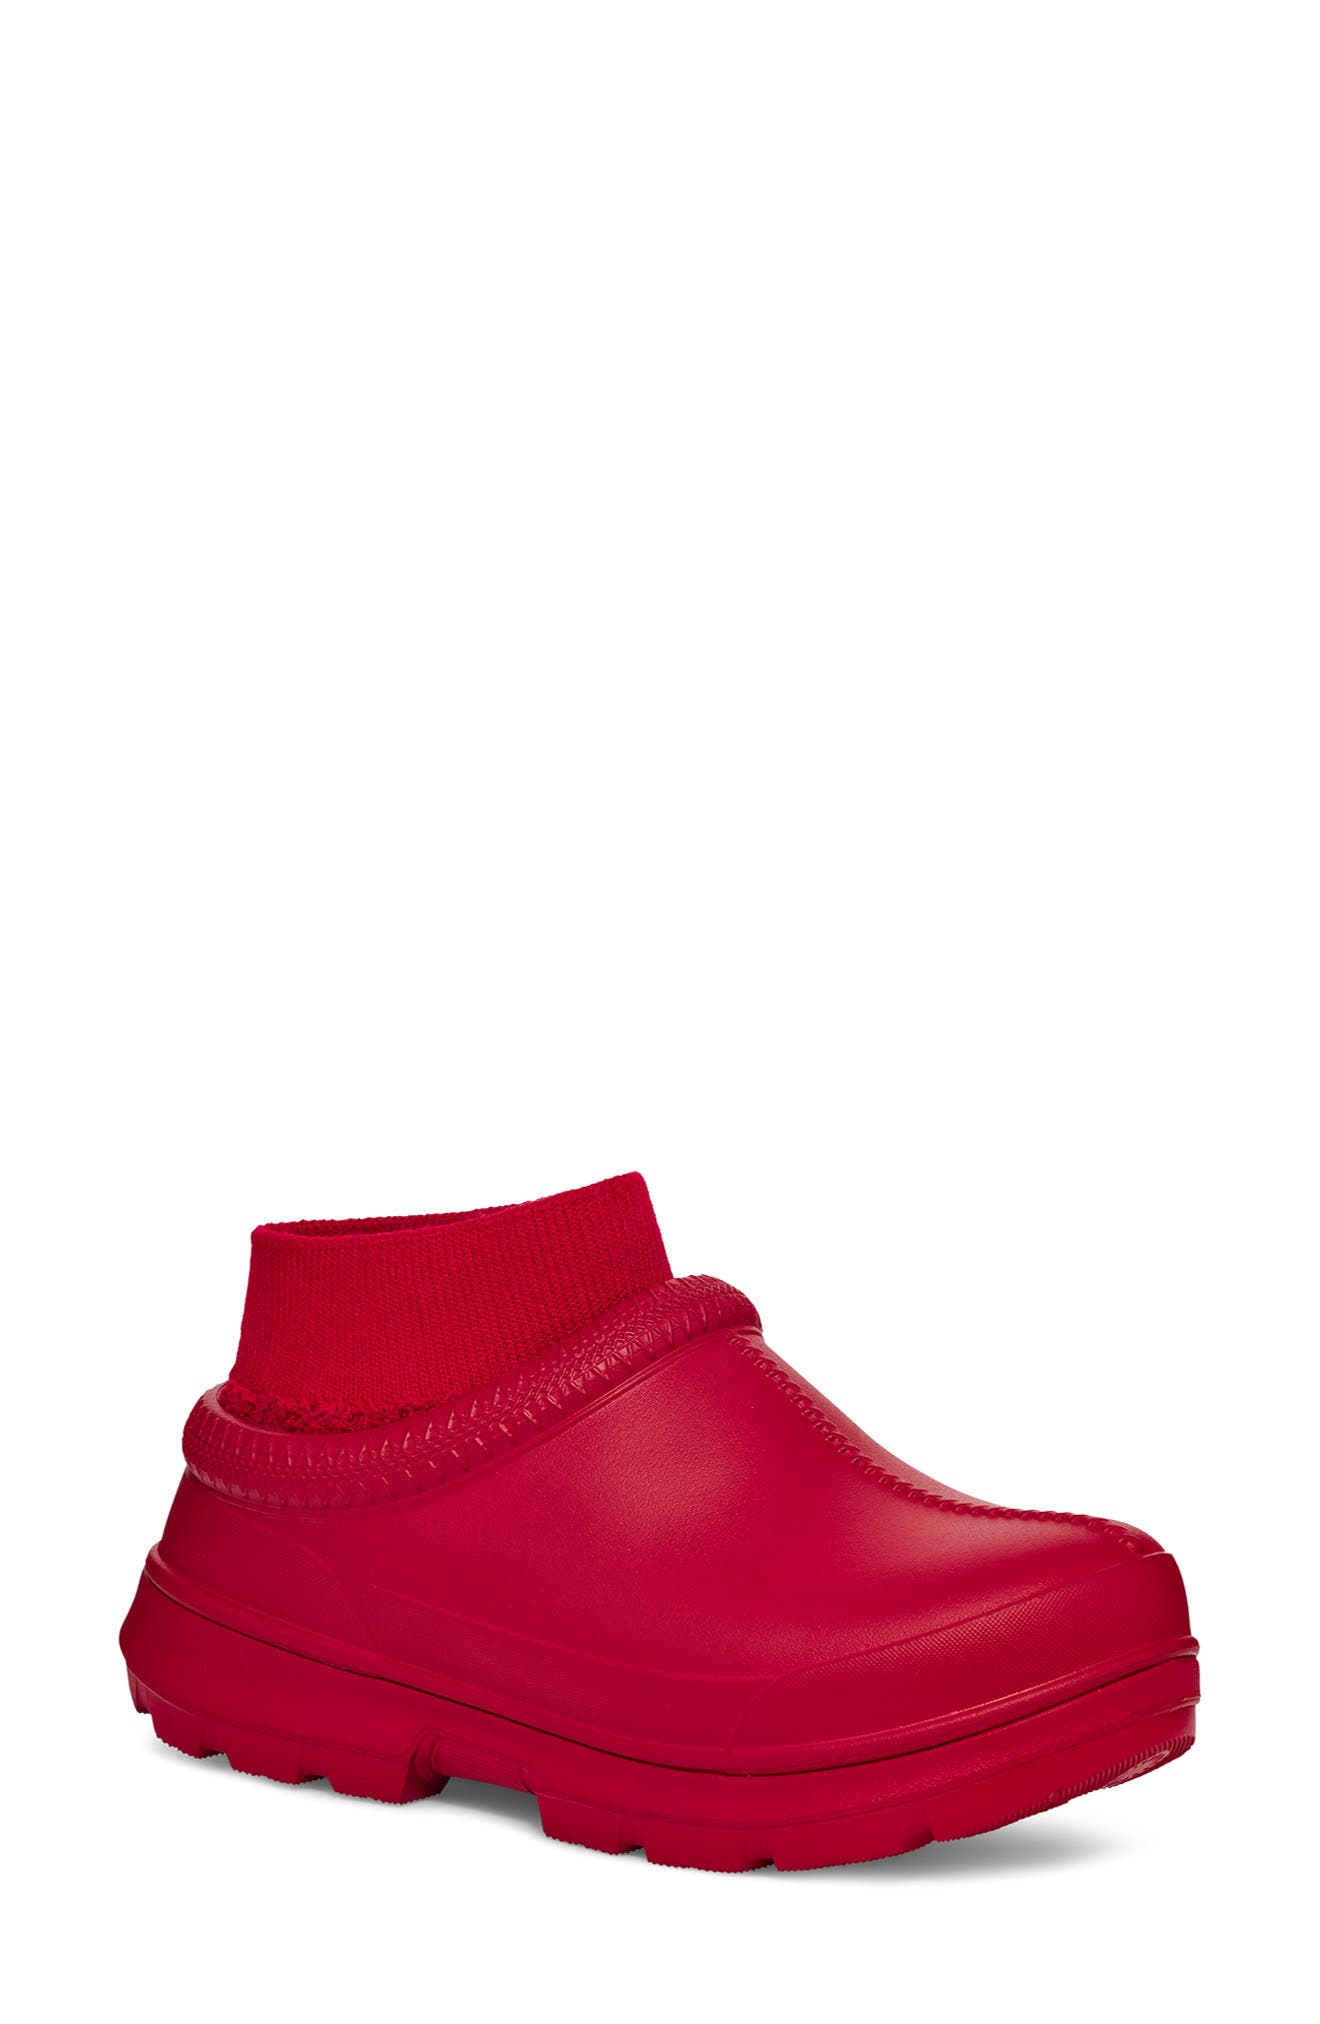 Closed Clog red Shoes Womens Shoes Clogs & Mules 